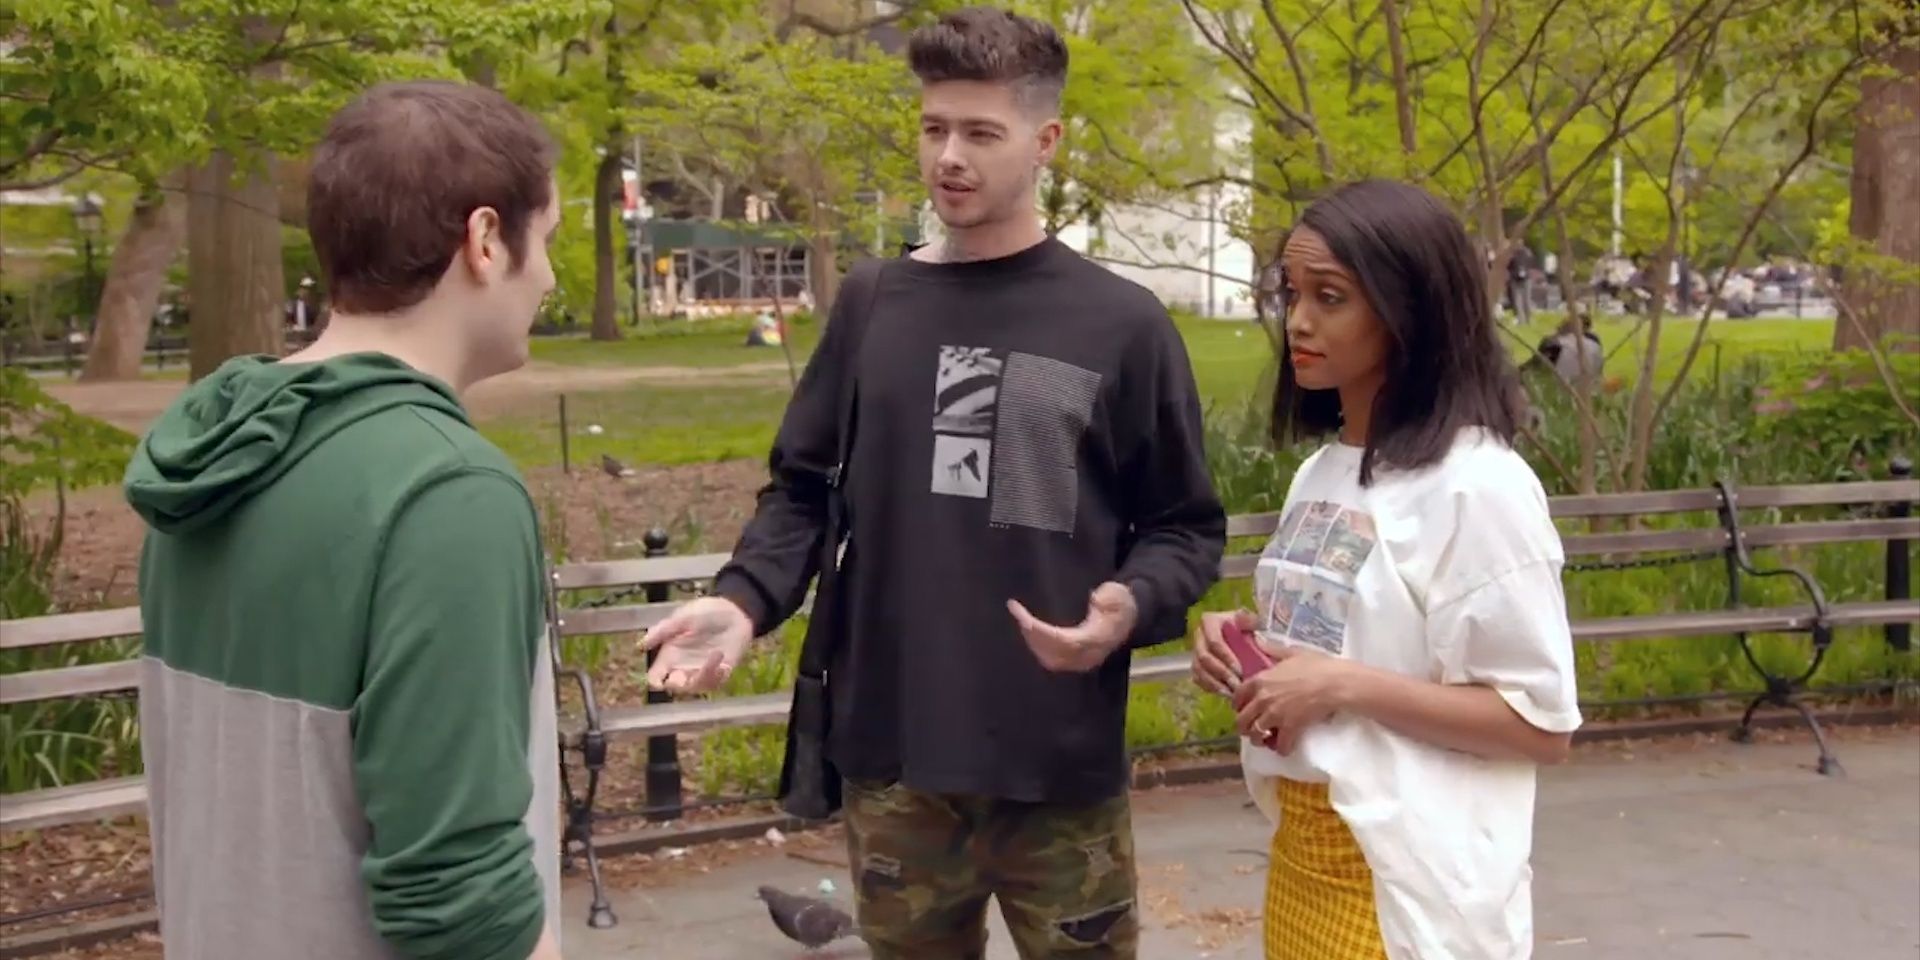 Hosts Travis Mills and Rachel Lindsay talking to a cast member on Ghosted